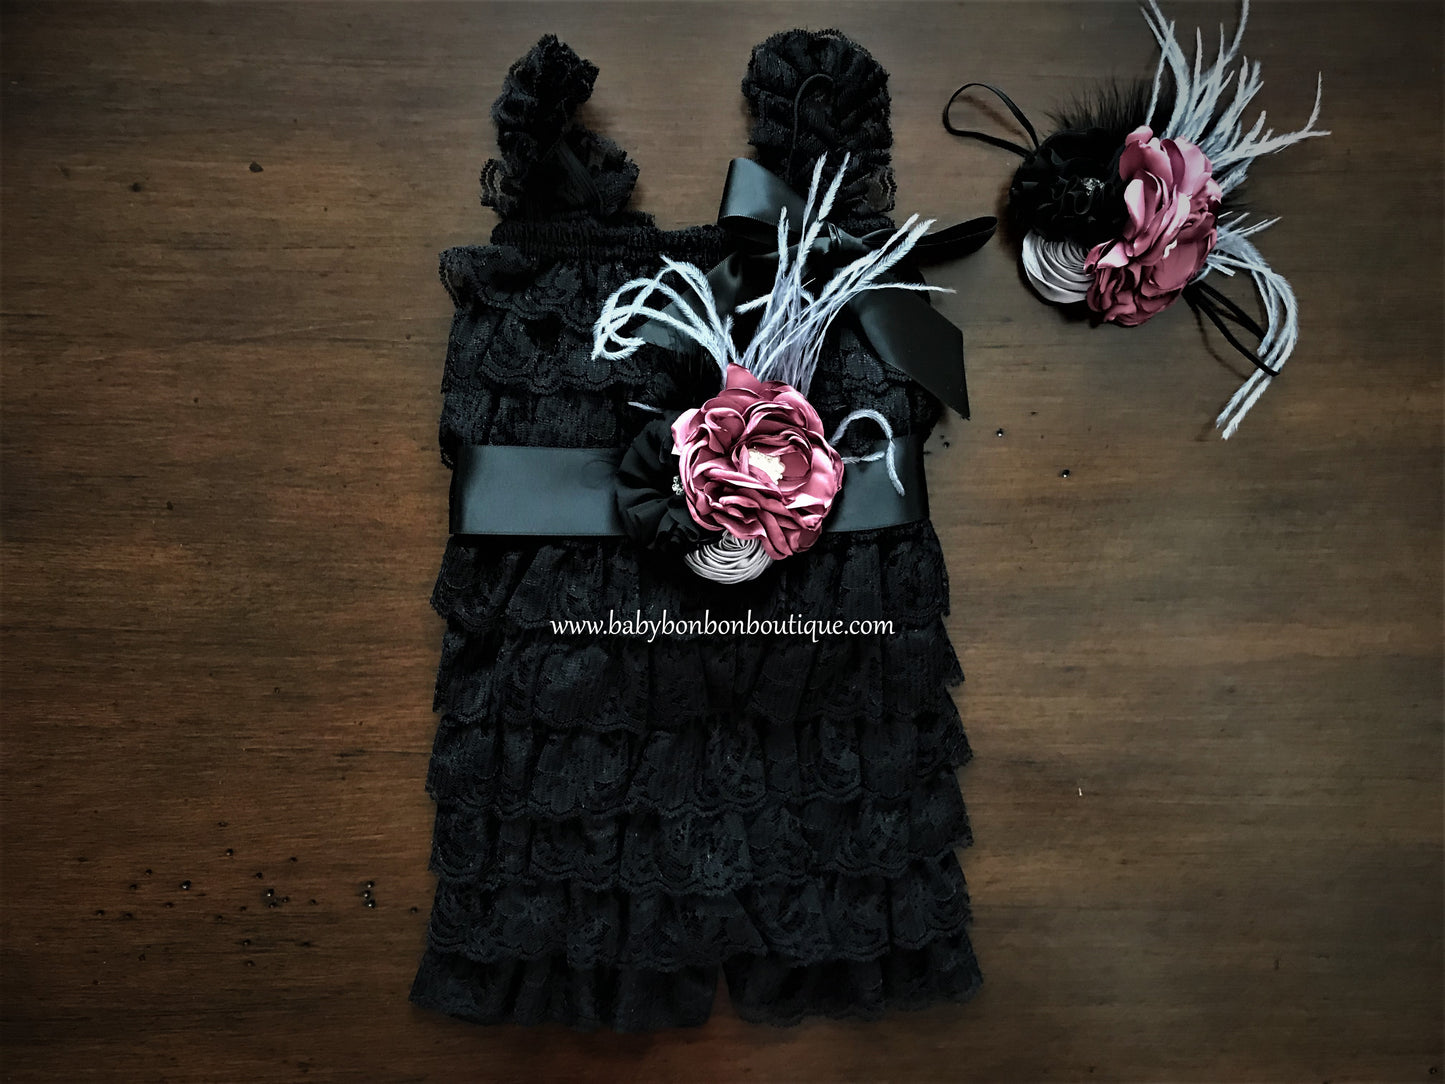 Smoky Gray Baby Lace Romper with Headband & Sash, Black Baby Lace Romper